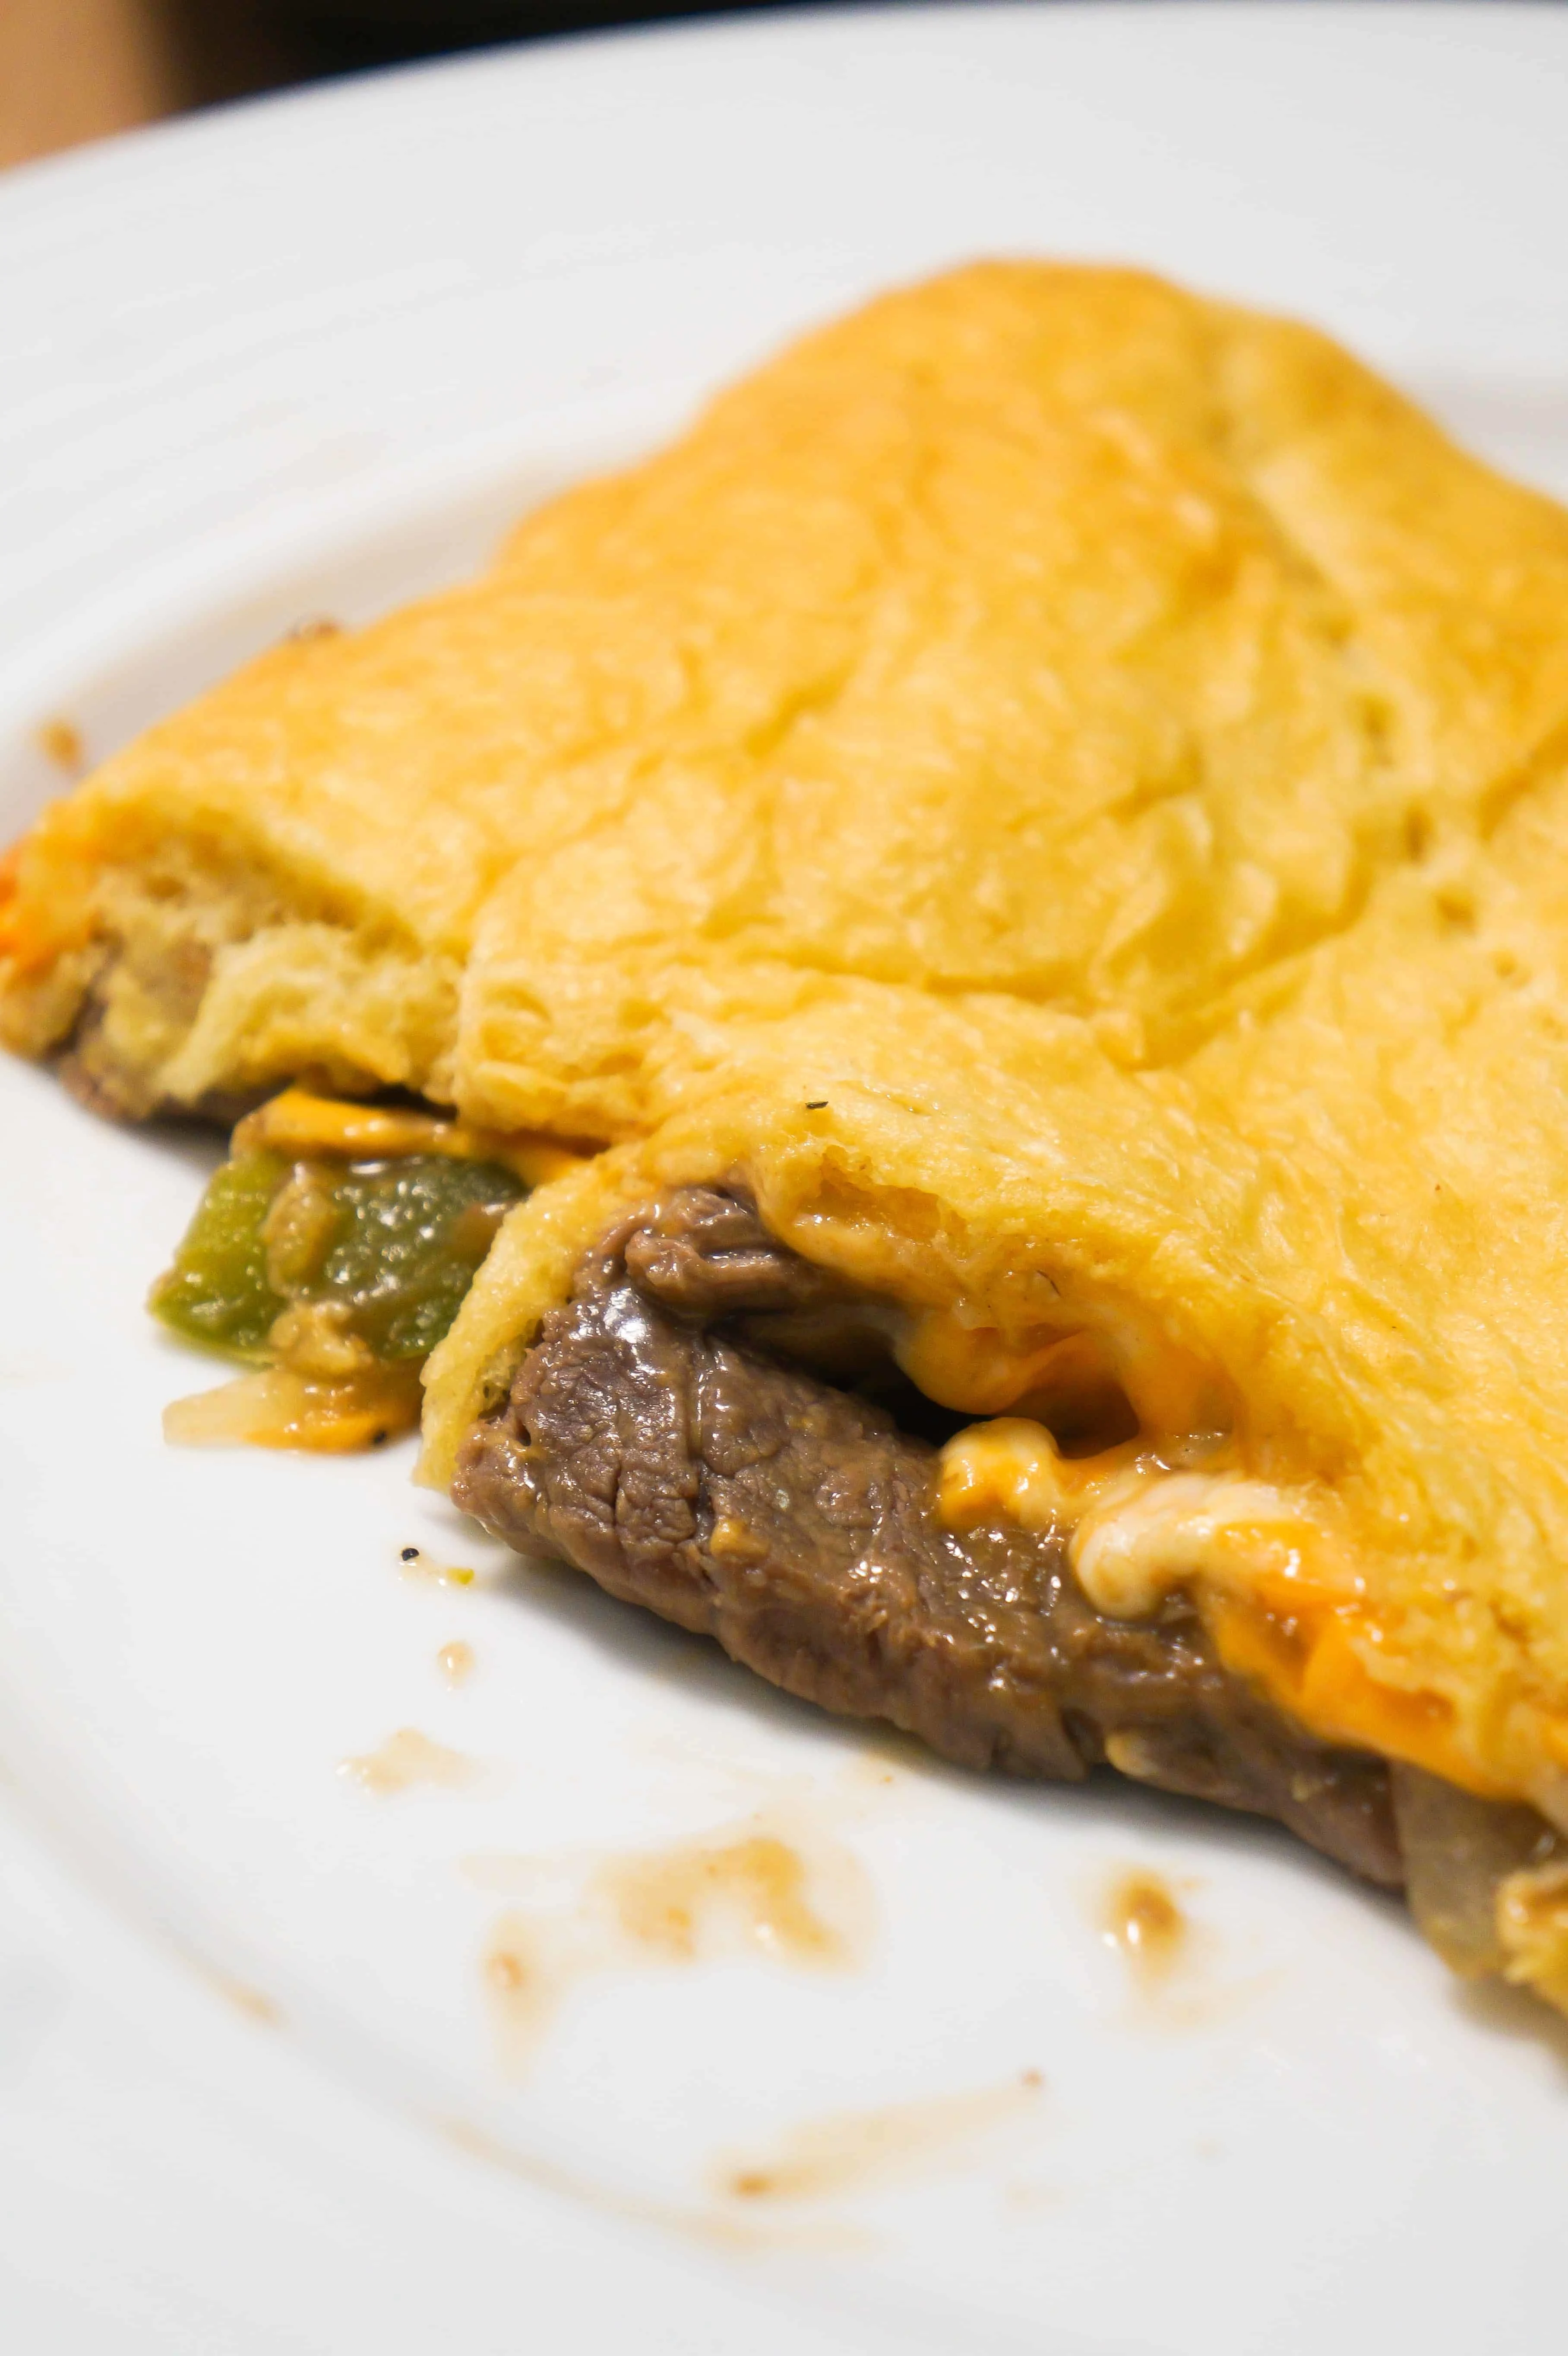 Philly Cheese Steak Crescent Bake is a twist on the Philly Cheese Sandwich.